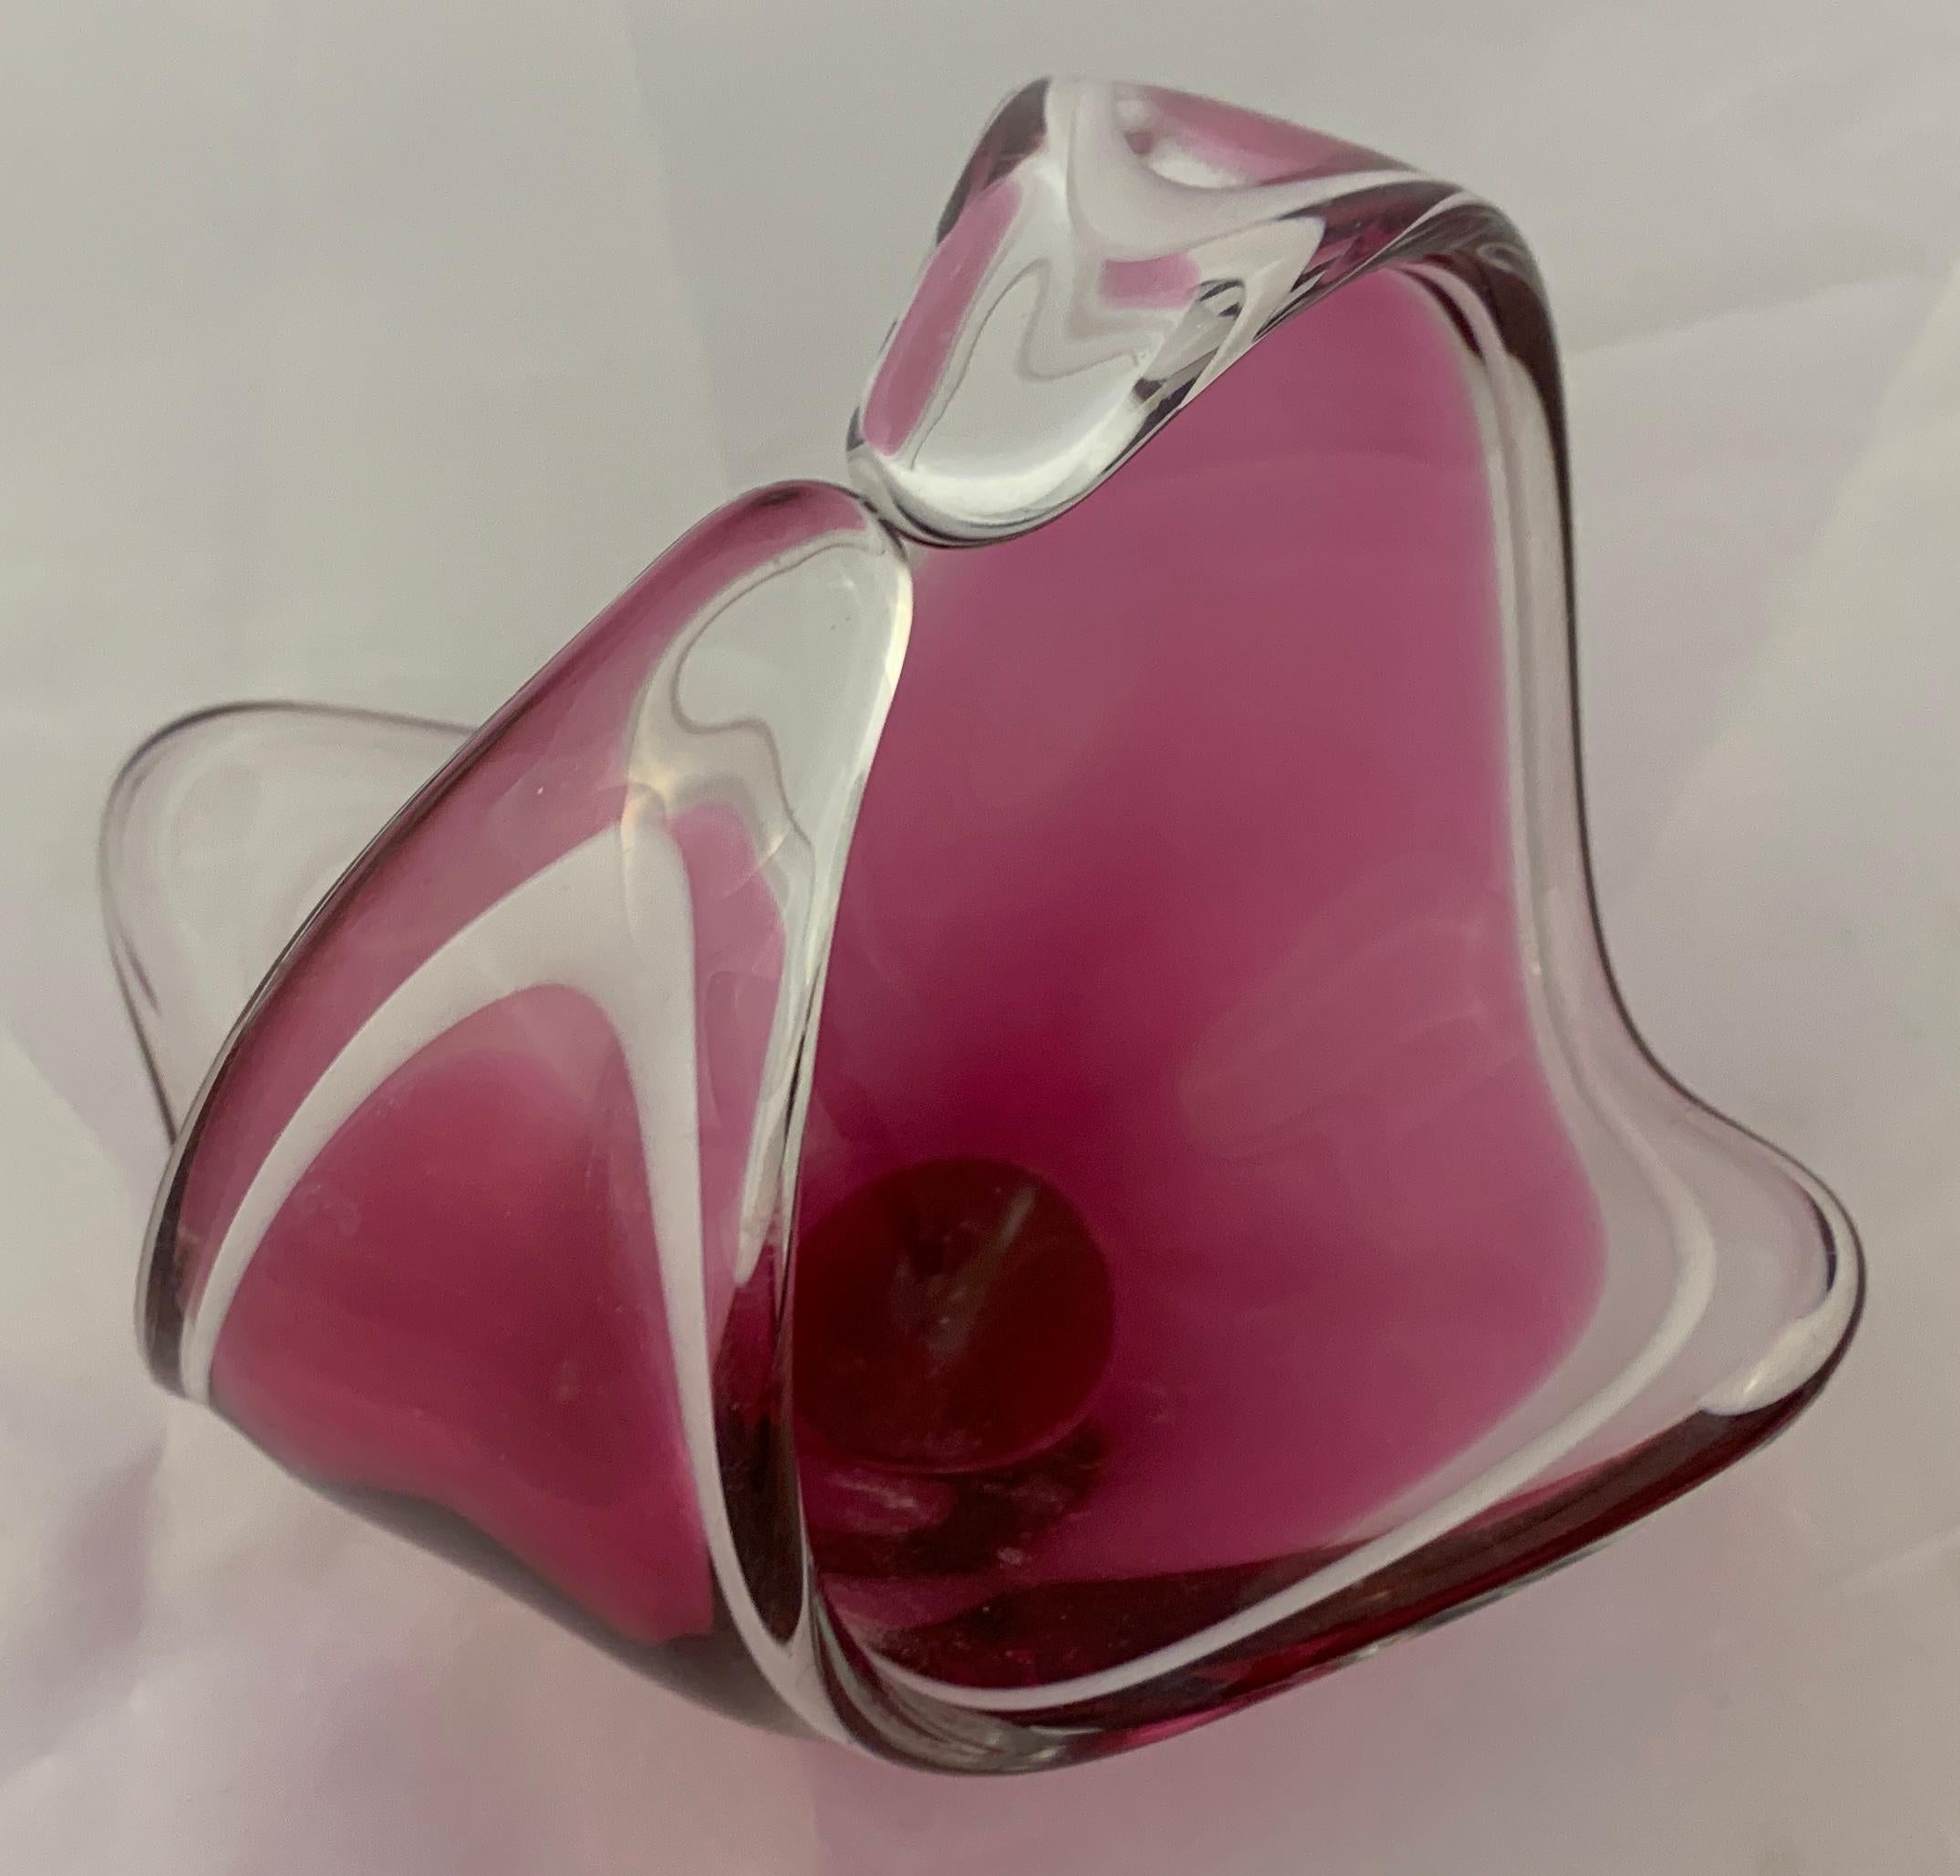 Rose-colored glass, with white background, Flygsfors manufacture, Sweden. Designer Paul Kedelv. Model Coquille, year 1950-1970. Marked on the base 1956.